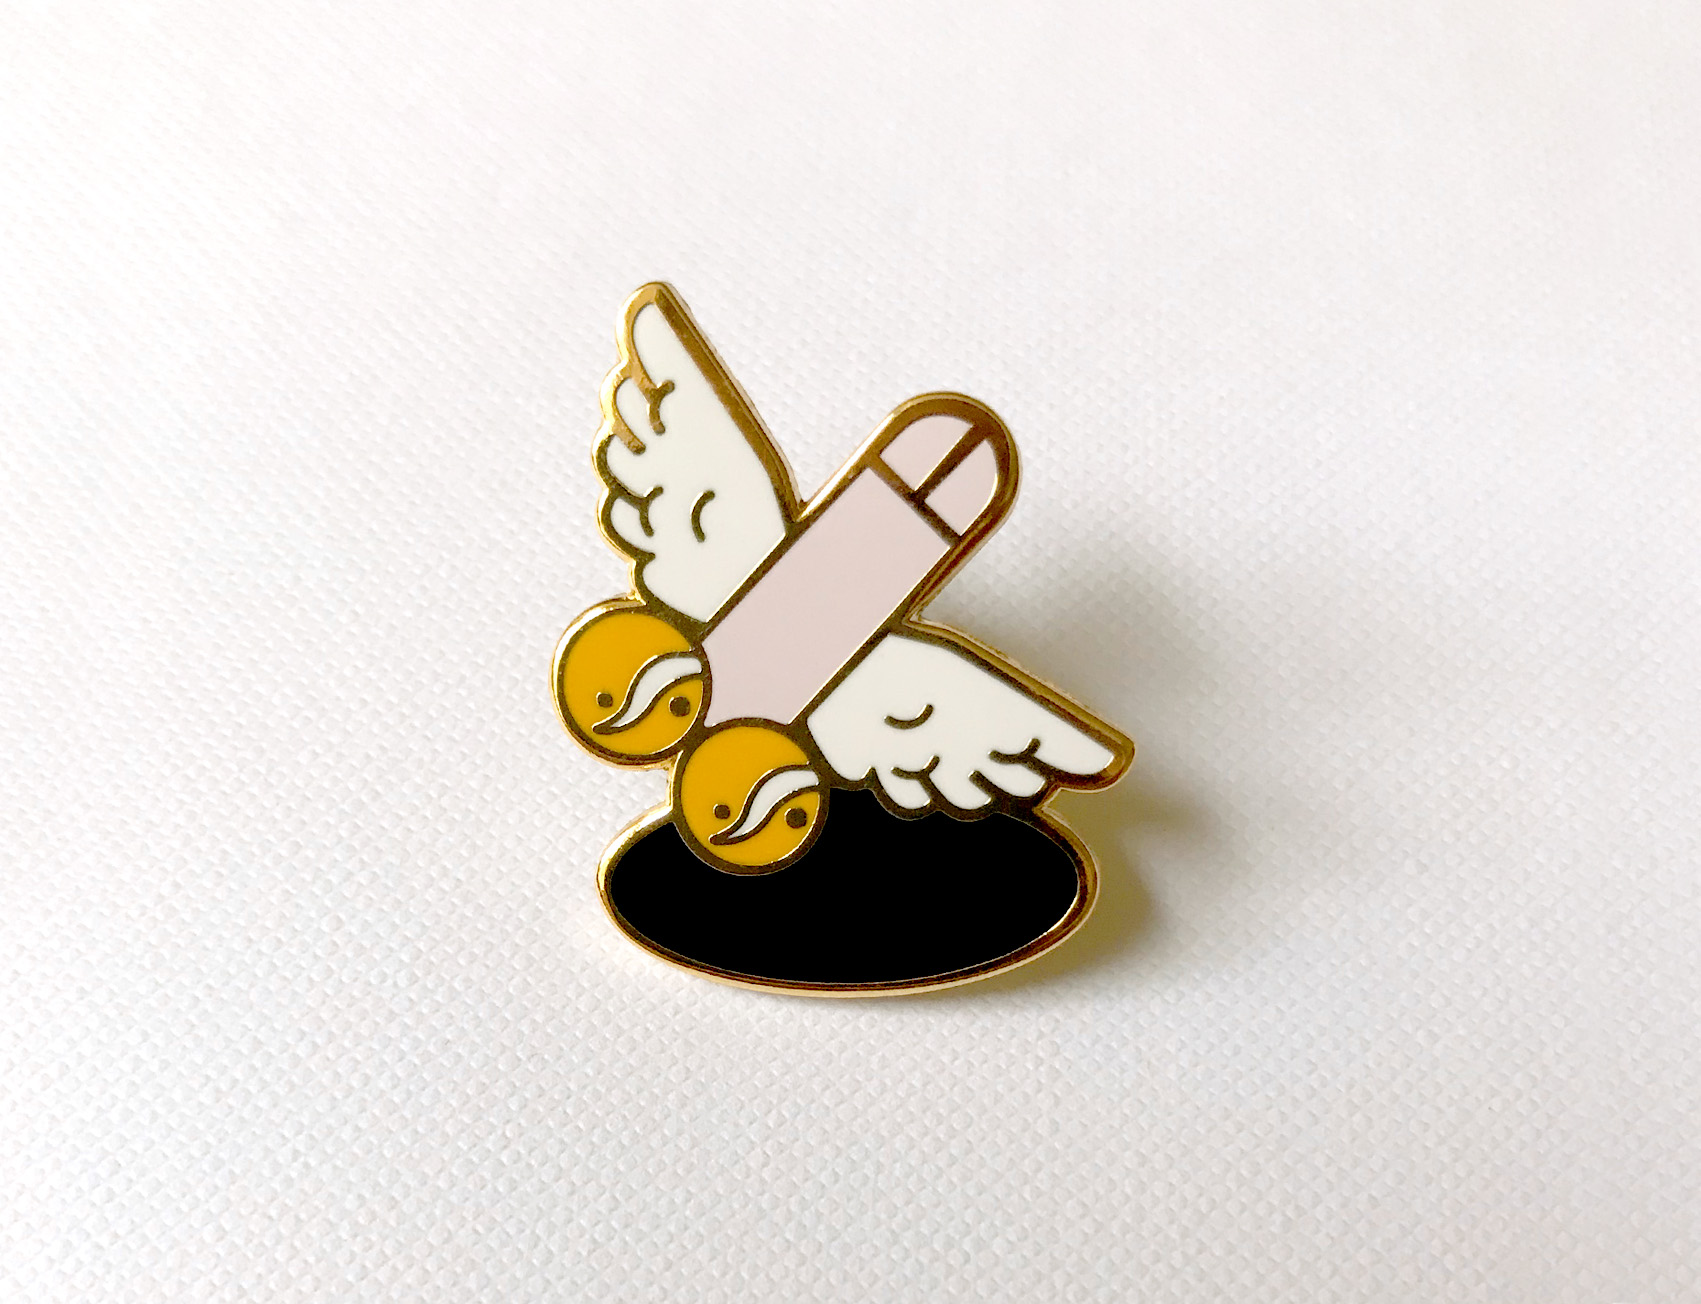 Copy of Marble Pins - Flying Dick